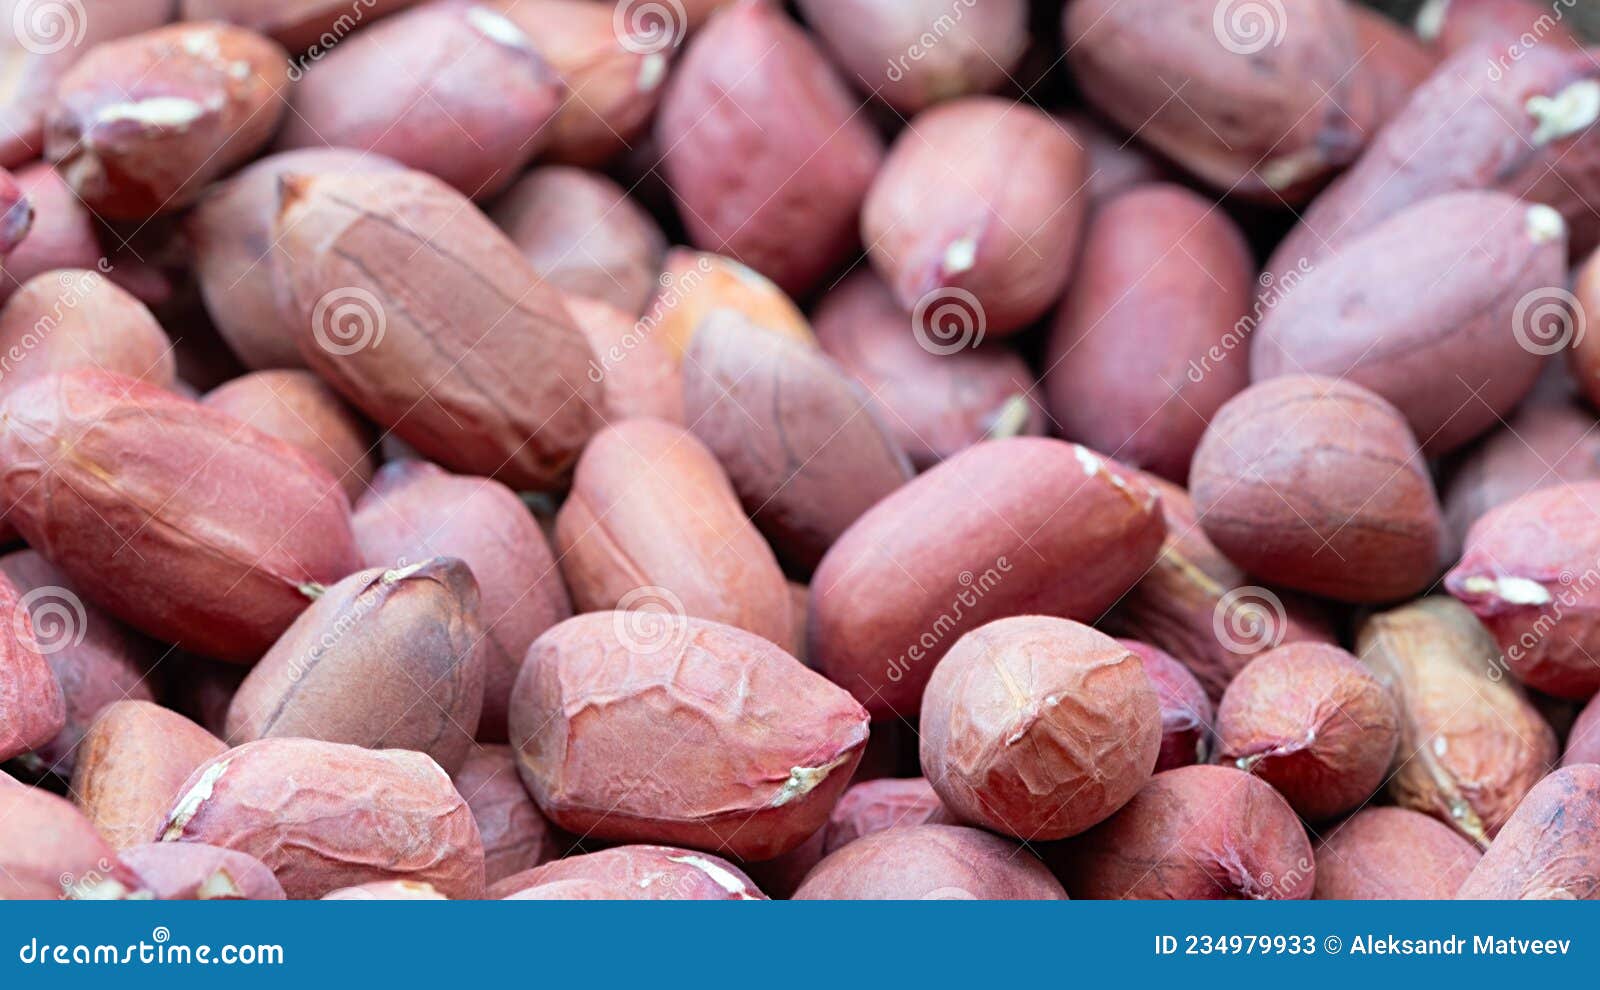 background of peanut placer bright snacks; close-up